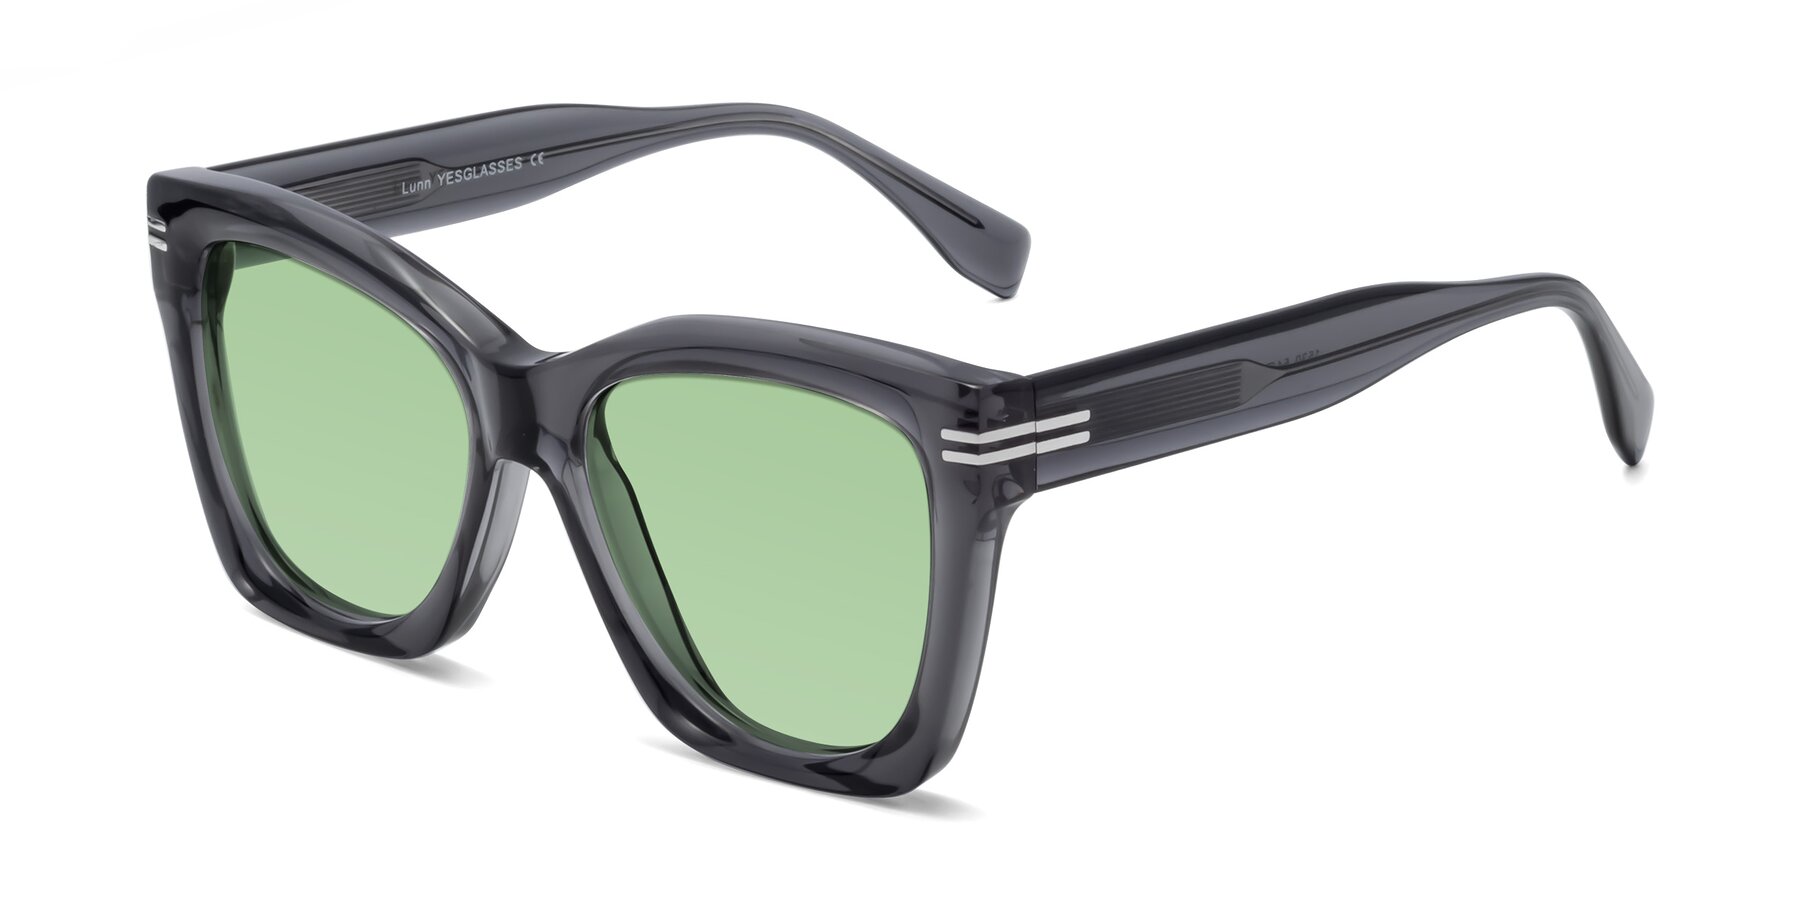 Angle of Lunn in Translucent Gray with Medium Green Tinted Lenses